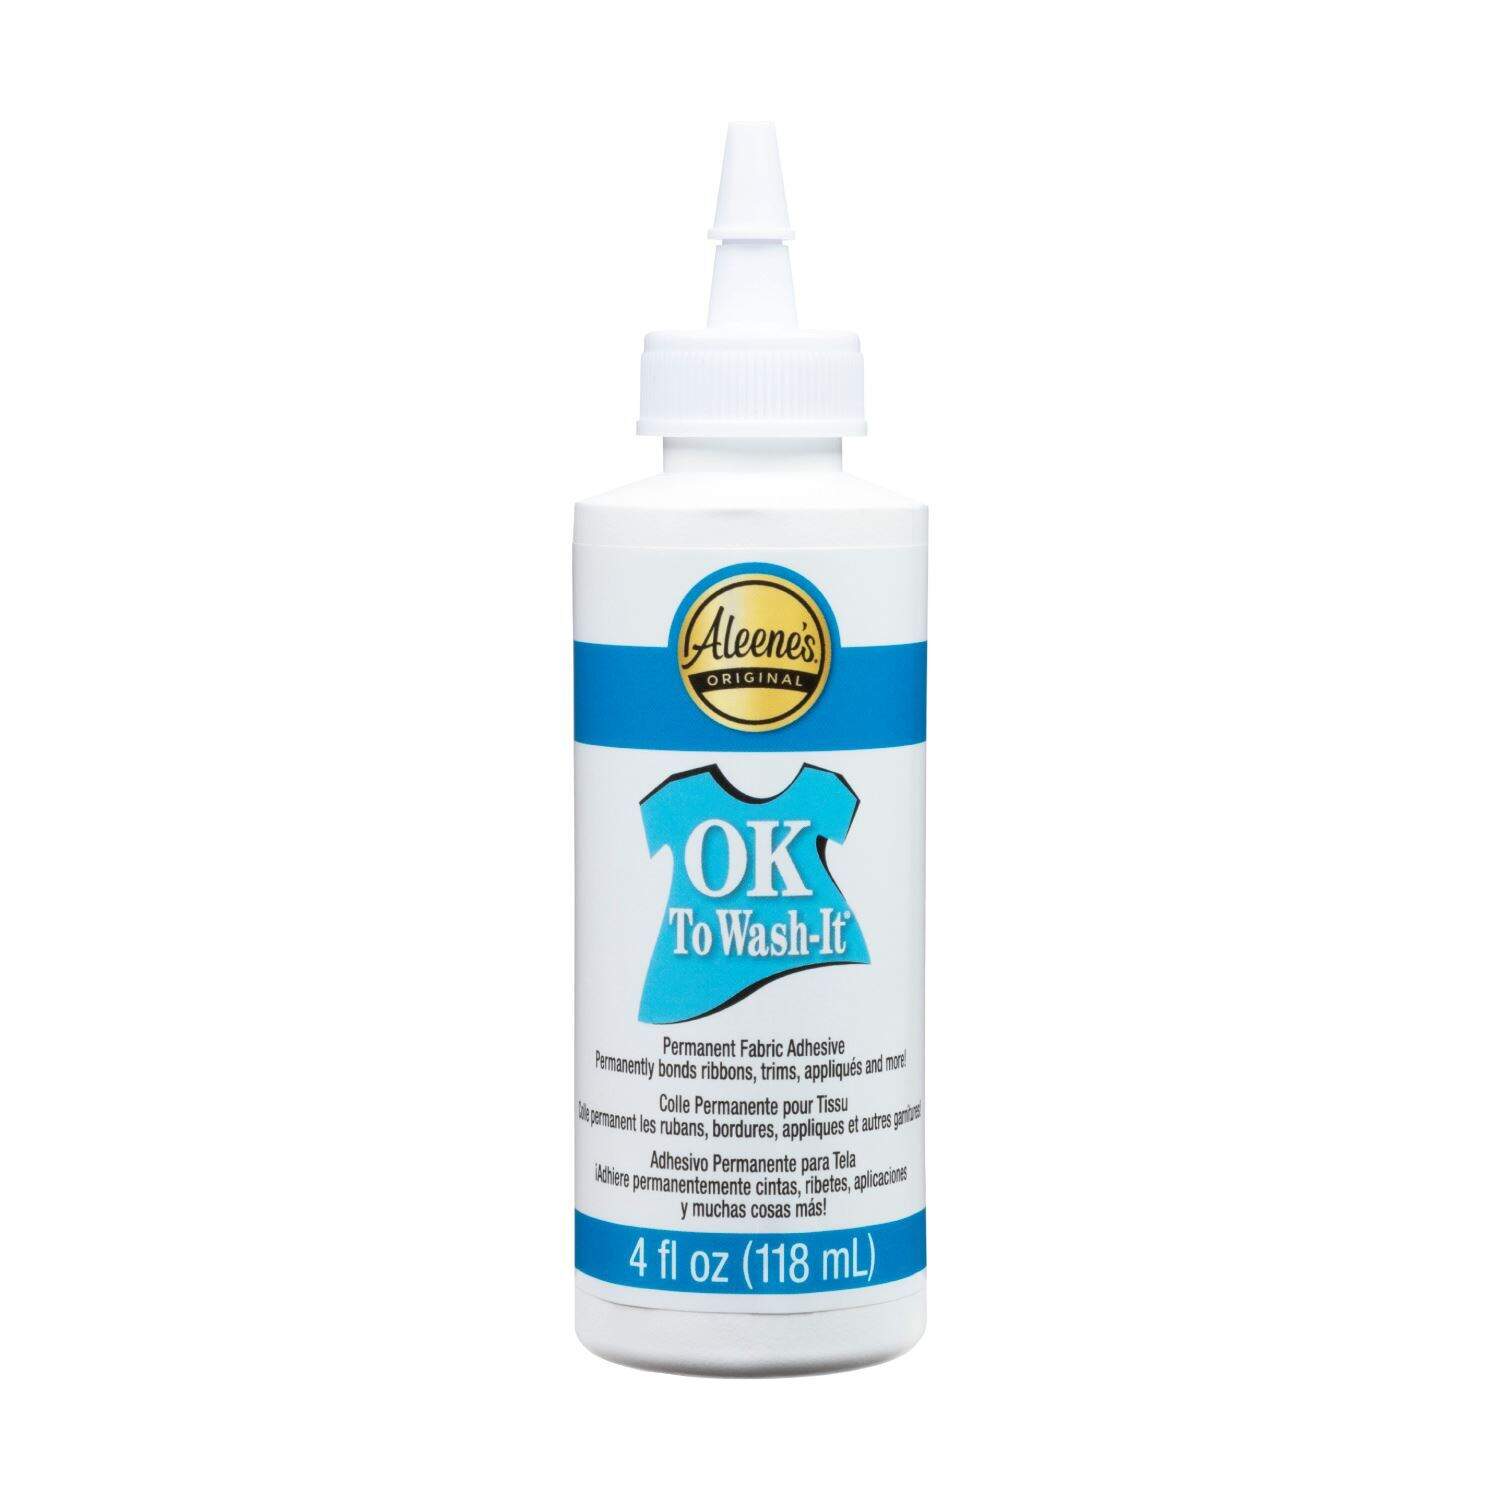 Quick Fix Bonding Fabric Glue Fast Dry and Clear Washable for All Fabrics Clothing Cotton